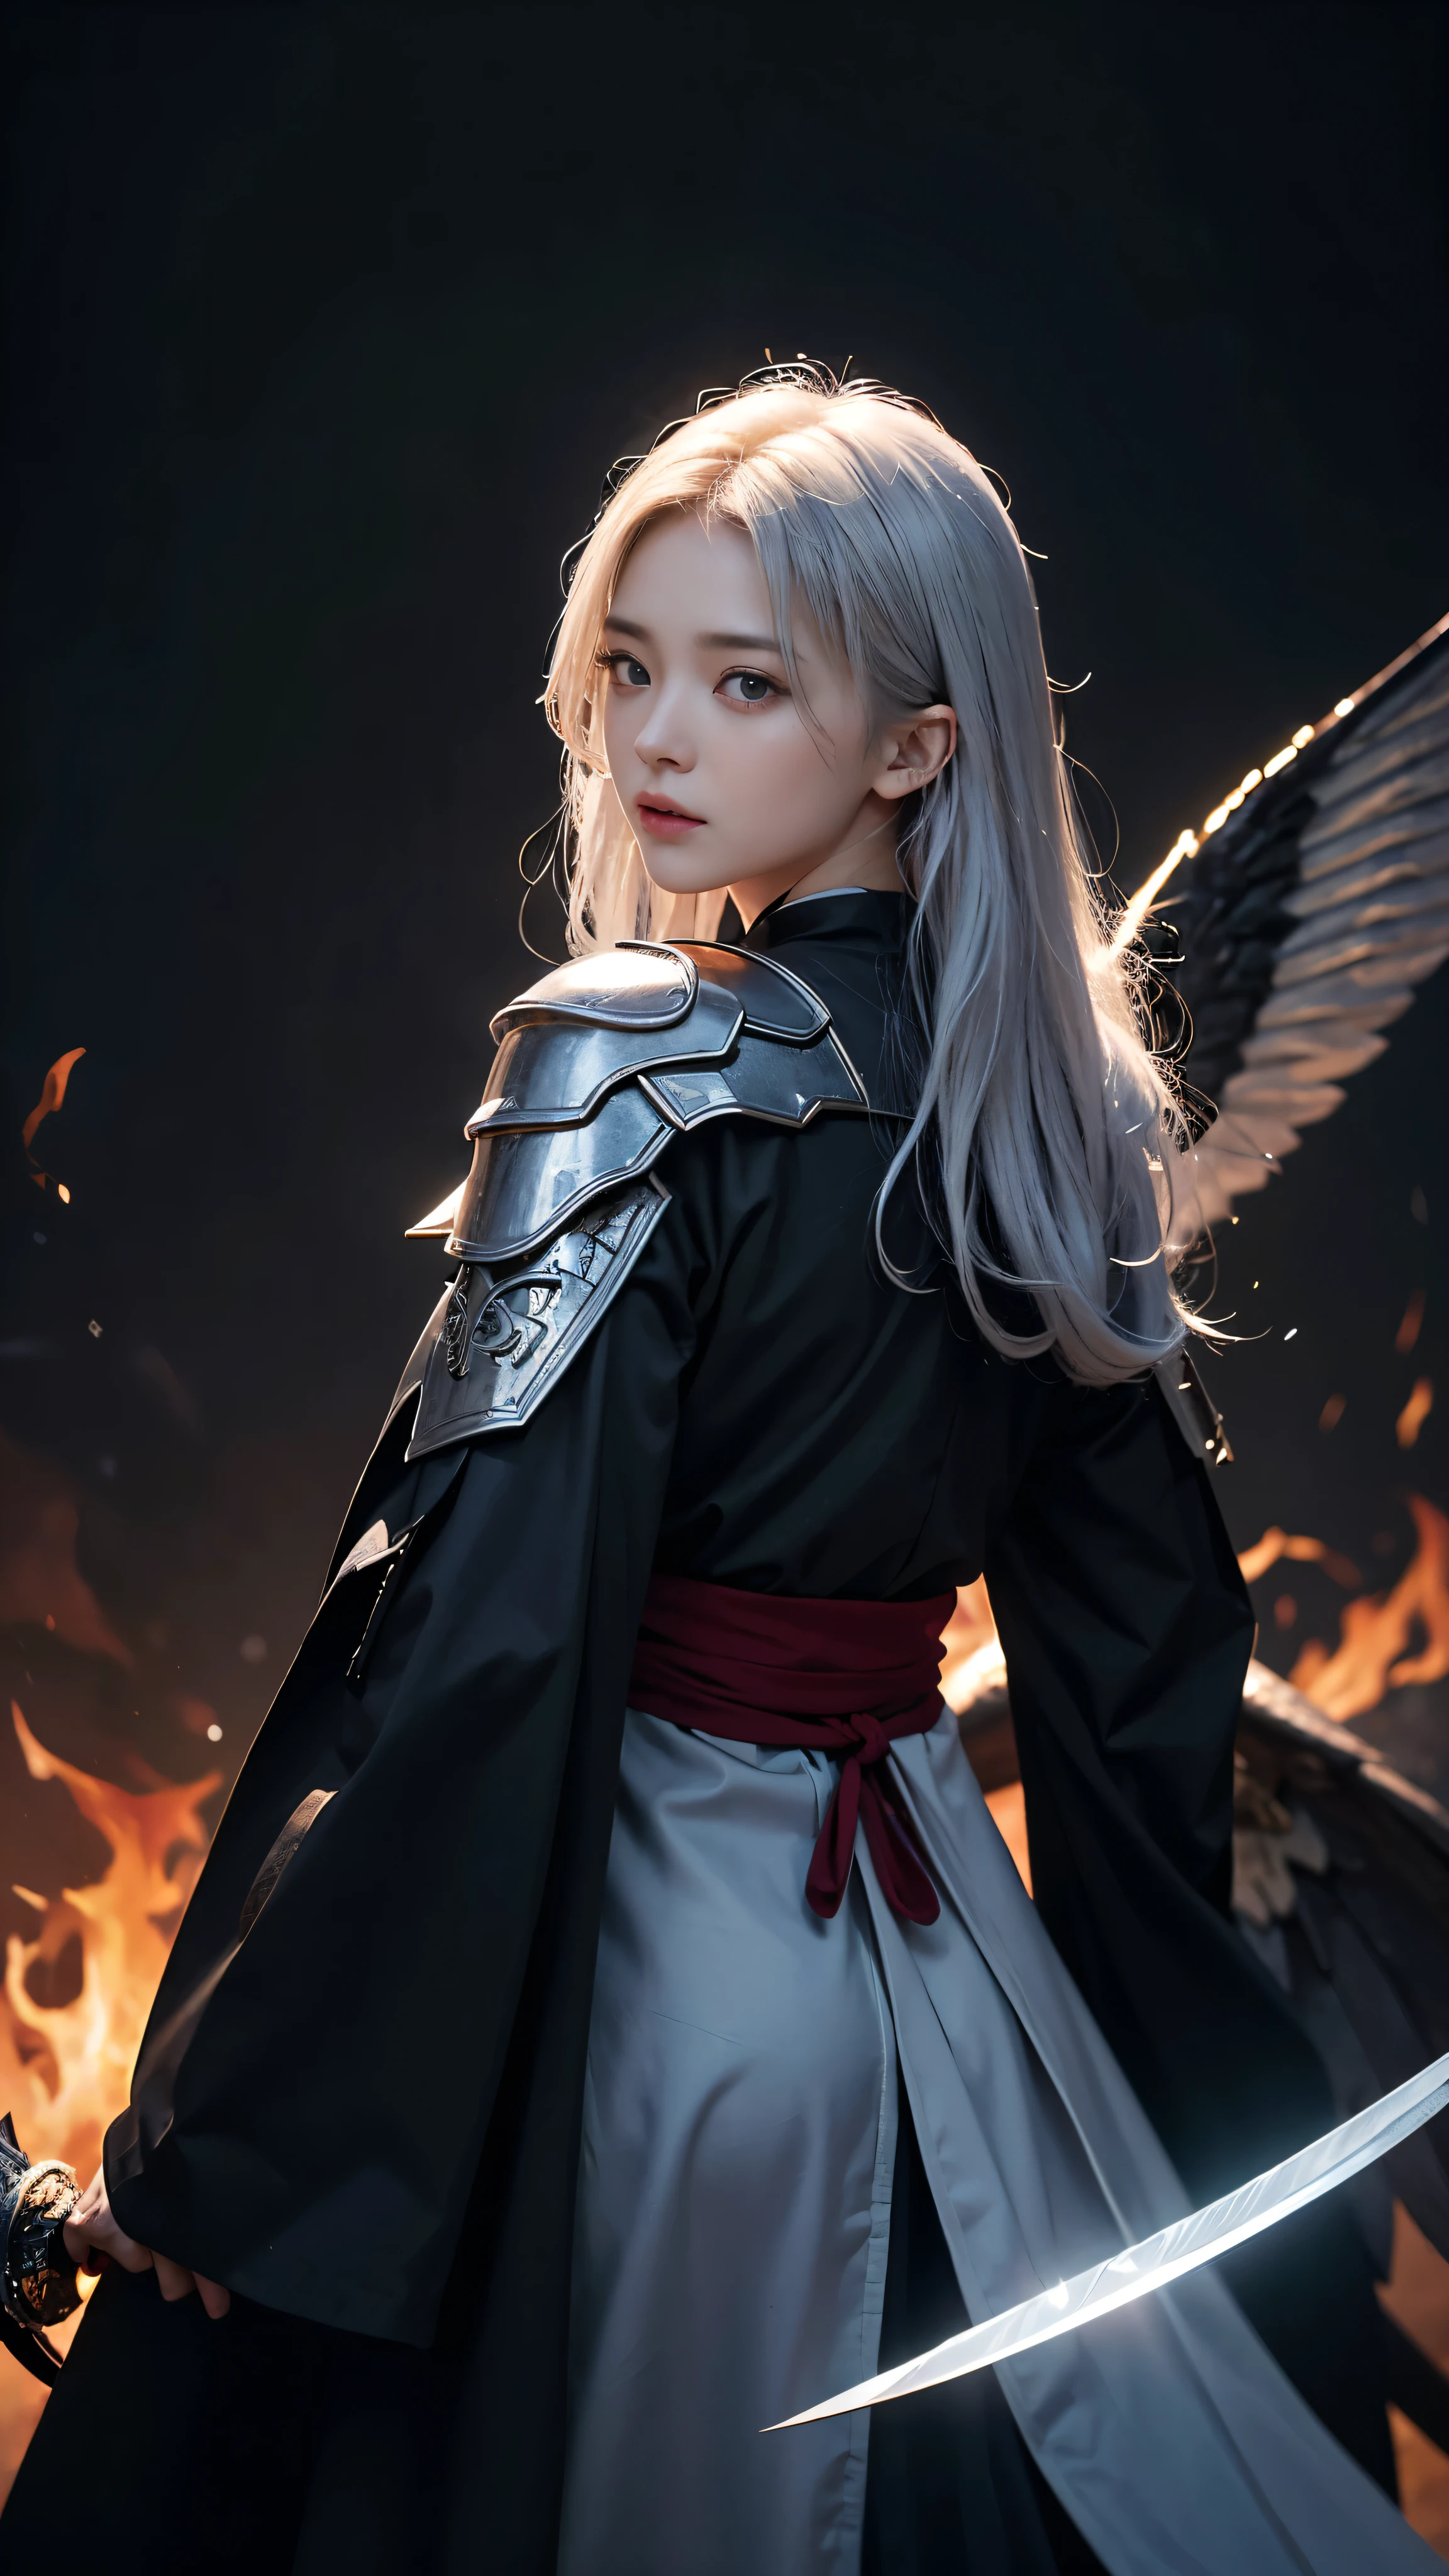 In this masterpiece、Beautiful swordsmen come to life with ultra-detailed illustrations and 8K resolution。The texture of the face and skin is expressed in detail.、The silver hair cascading down her back makes the subject stand out in focus.。She is framed by the depth of field、He wears jet black armor and flame armor.、It adds an element of absurdity to an already captivating look.。The cloak is engulfed in flames、Increase your presence、The sword is also in flames。Wings of fire erupt from his back、It shows determination to overcome sadness。The sign of her unwavering spirit is、Her kind eyes and her strong